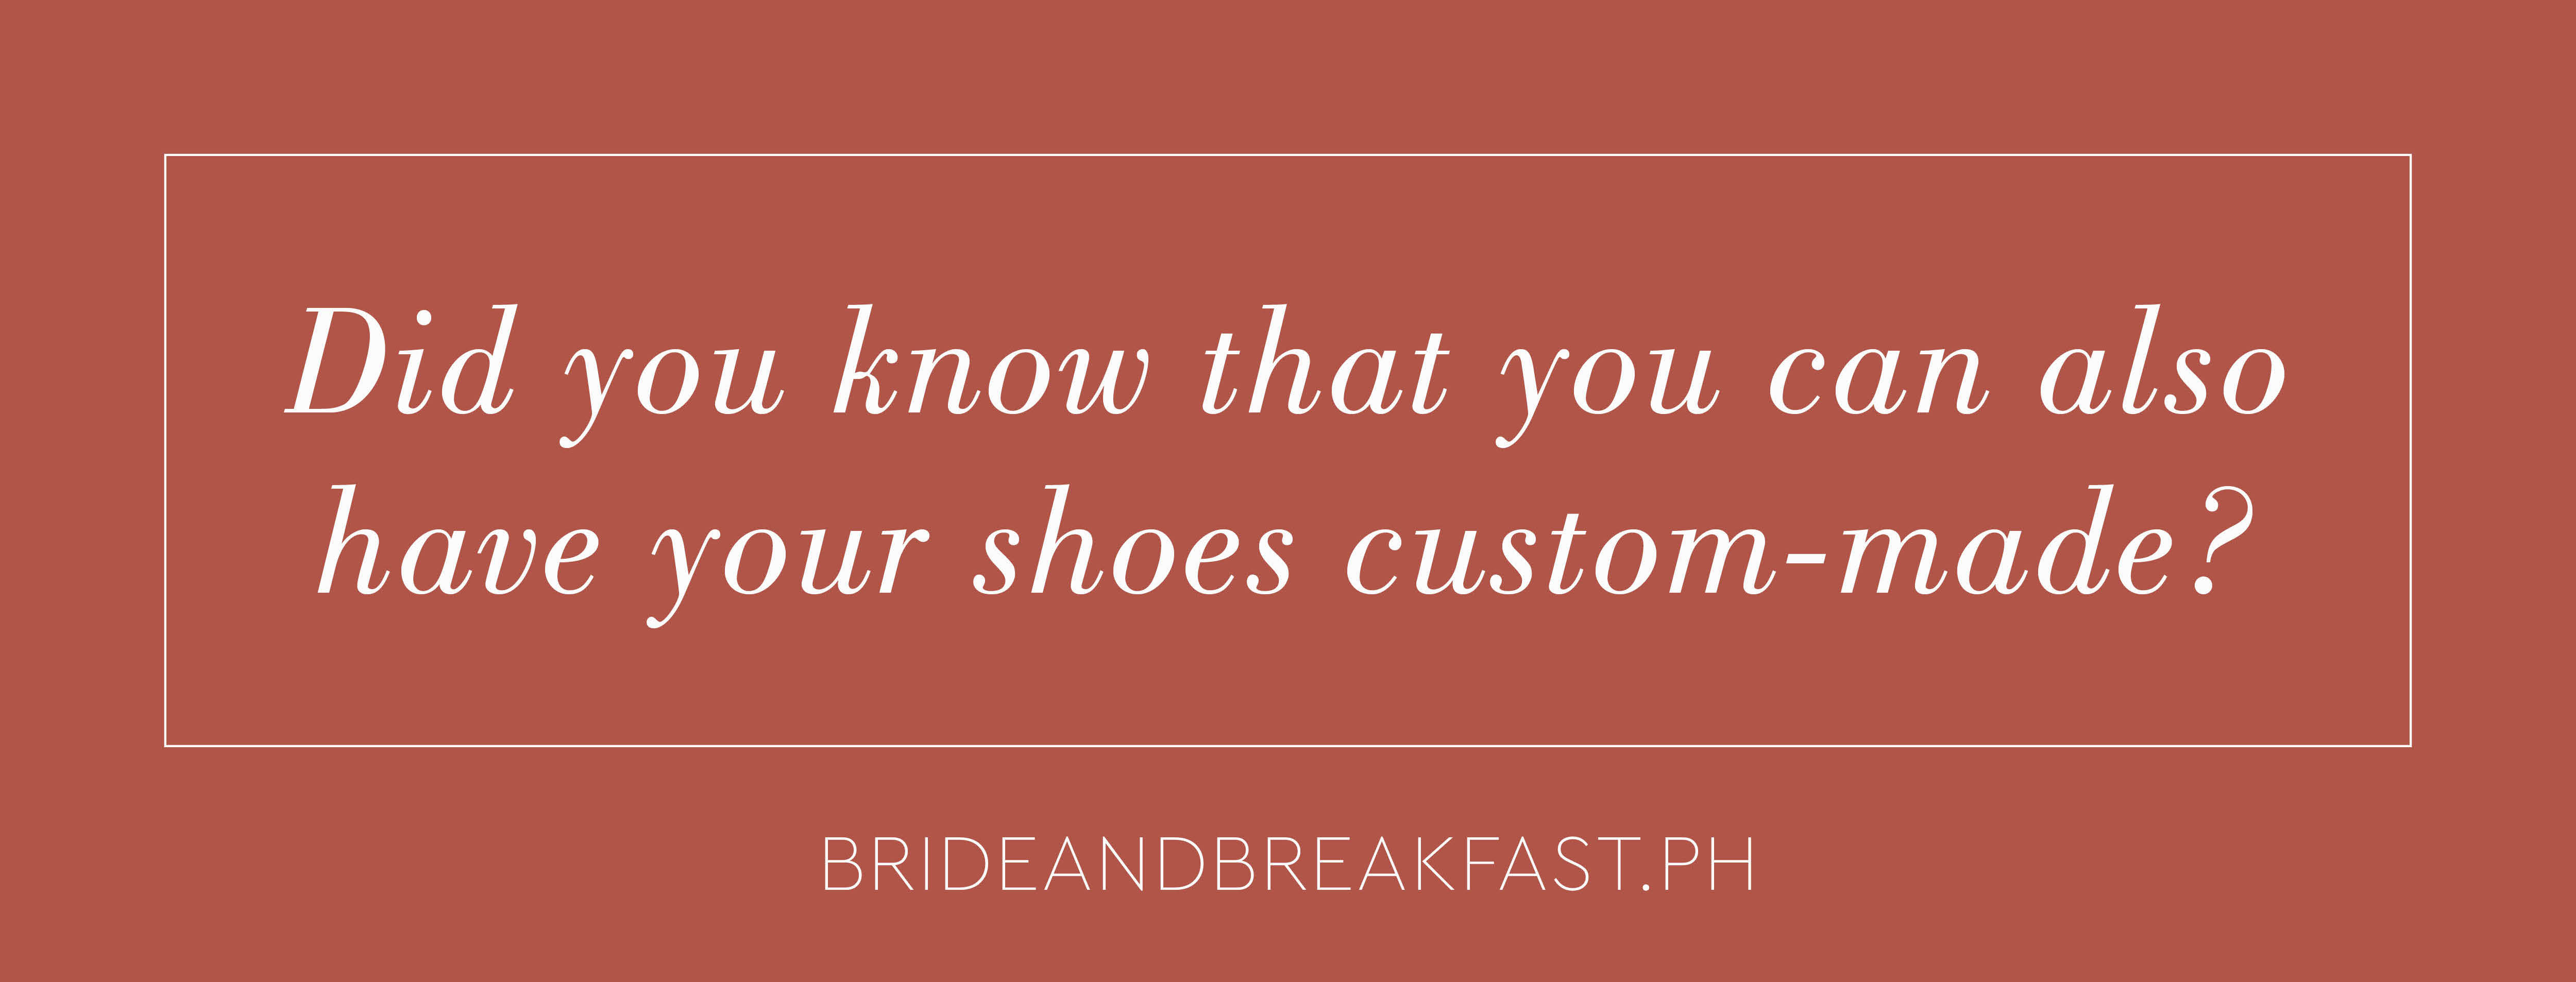 Did you know that you can also have your shoes custom-made?